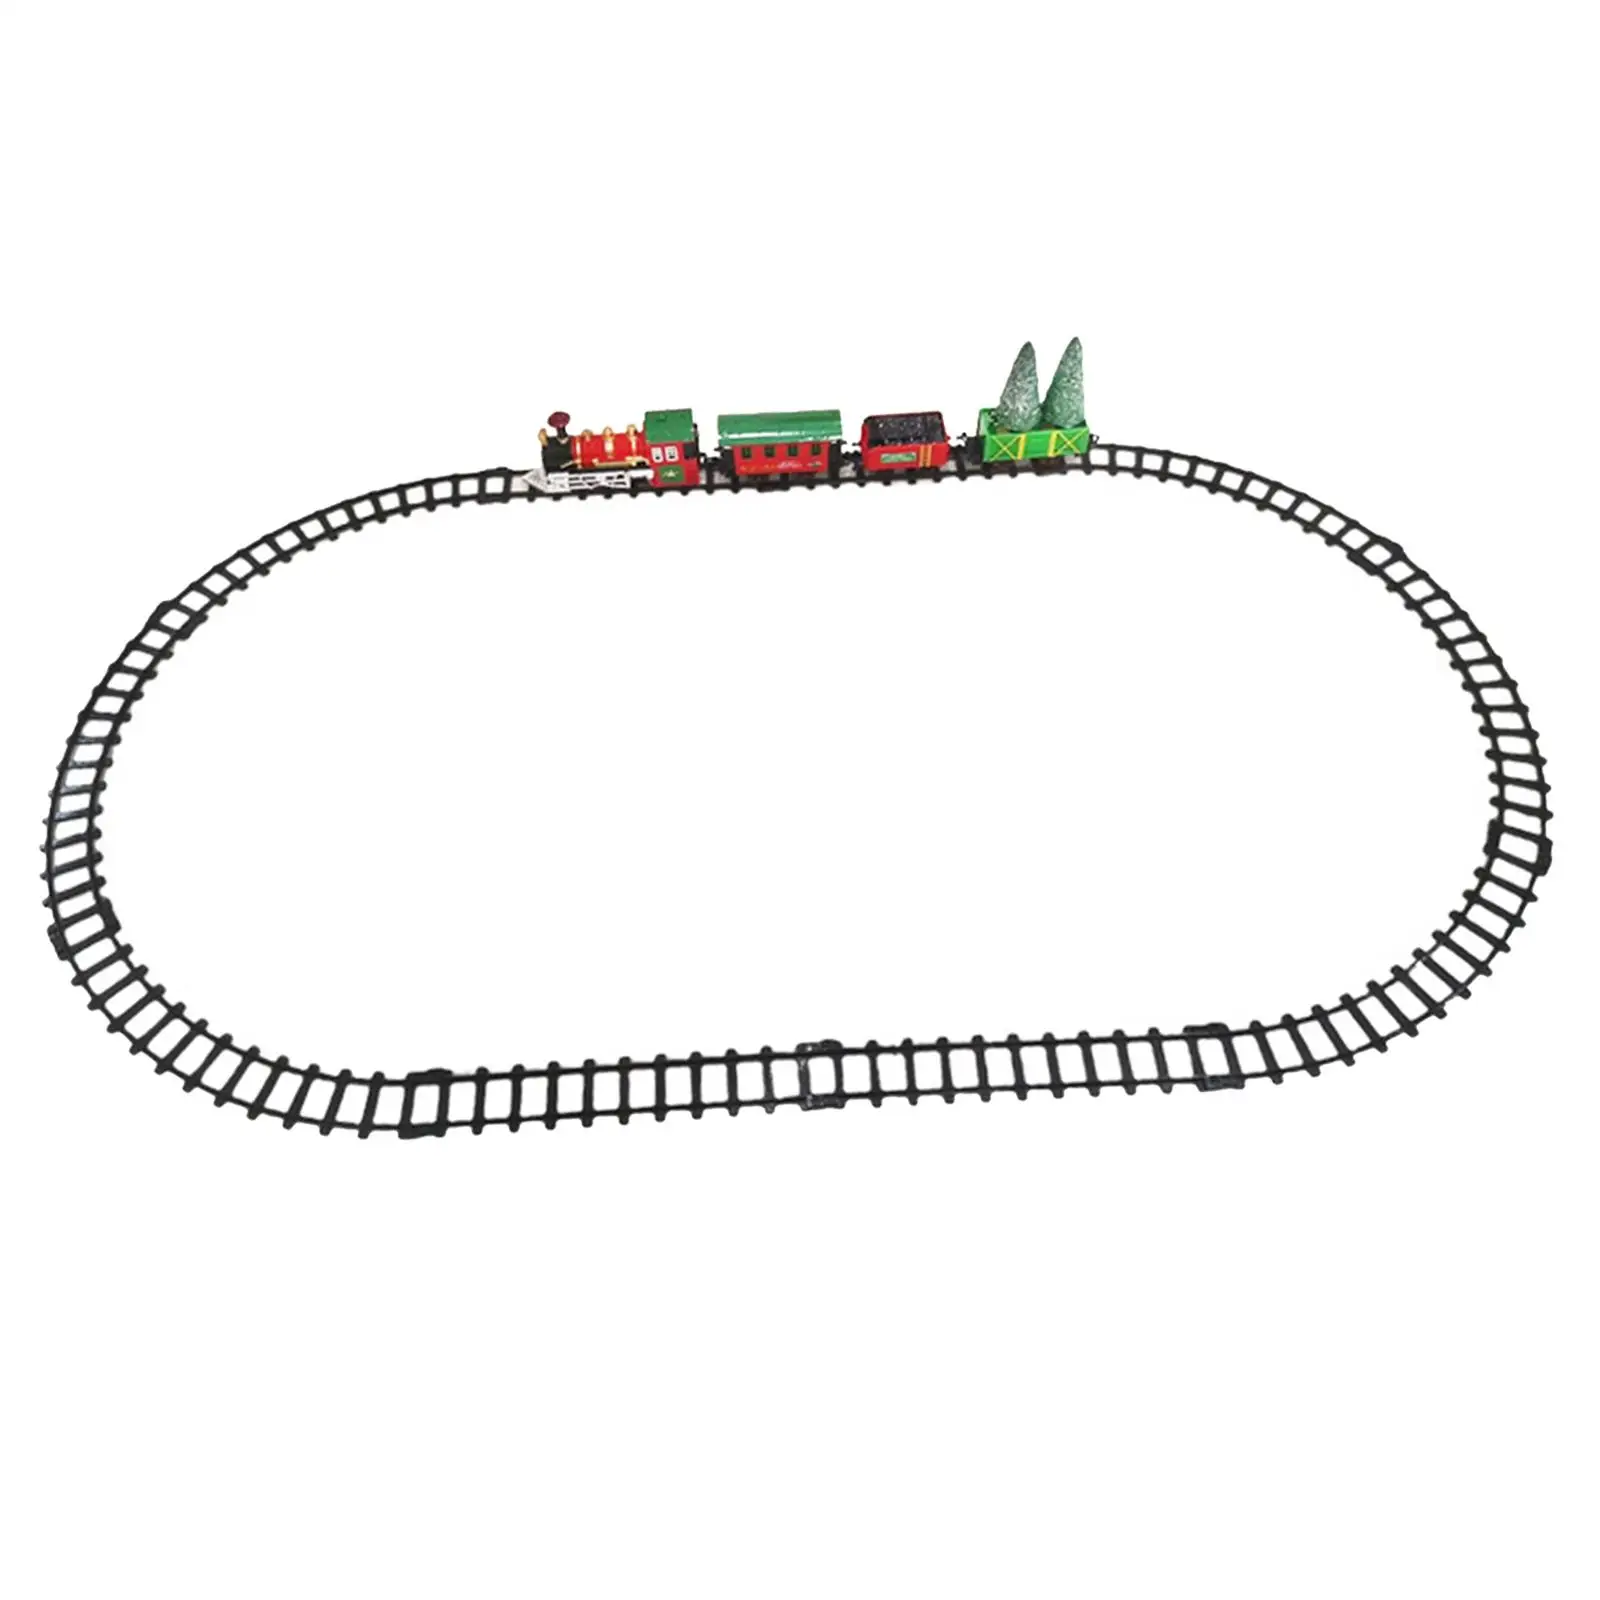 Railway Tracks Kids Toy Electric Train Track for Preschool Toddlers Gifts